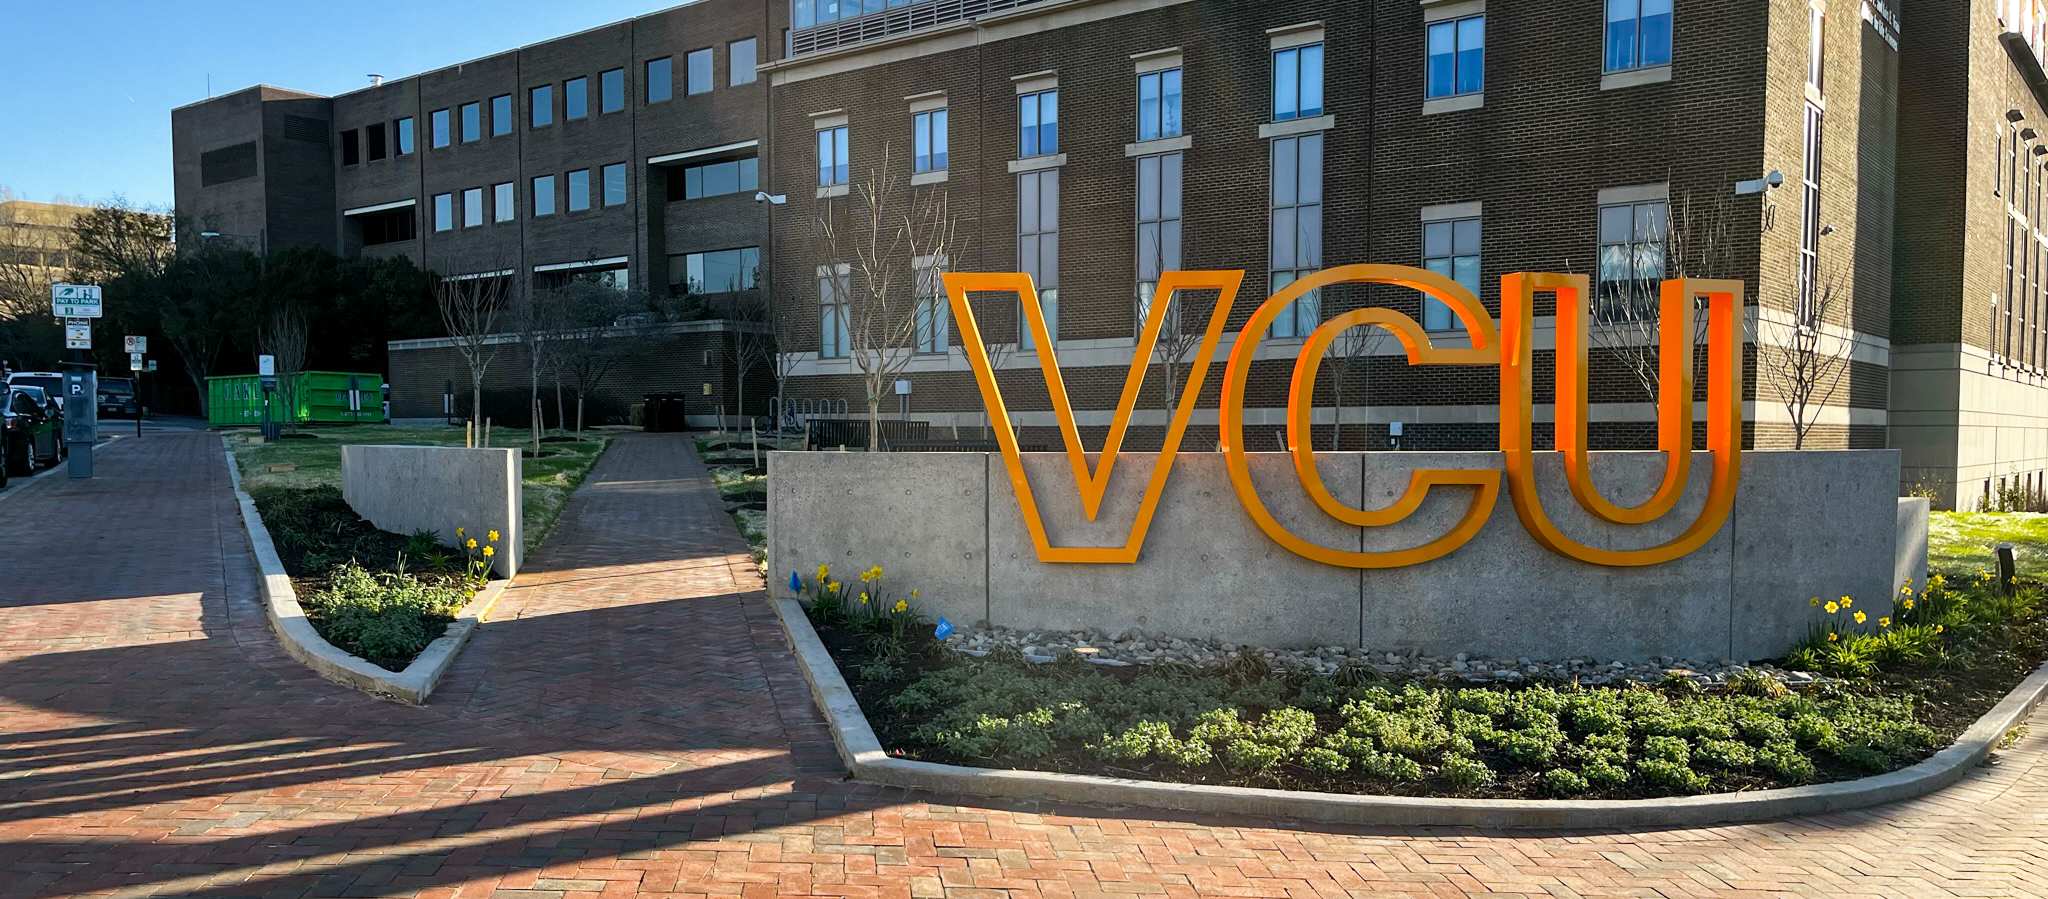 VCU sign in front of building with sidewalk